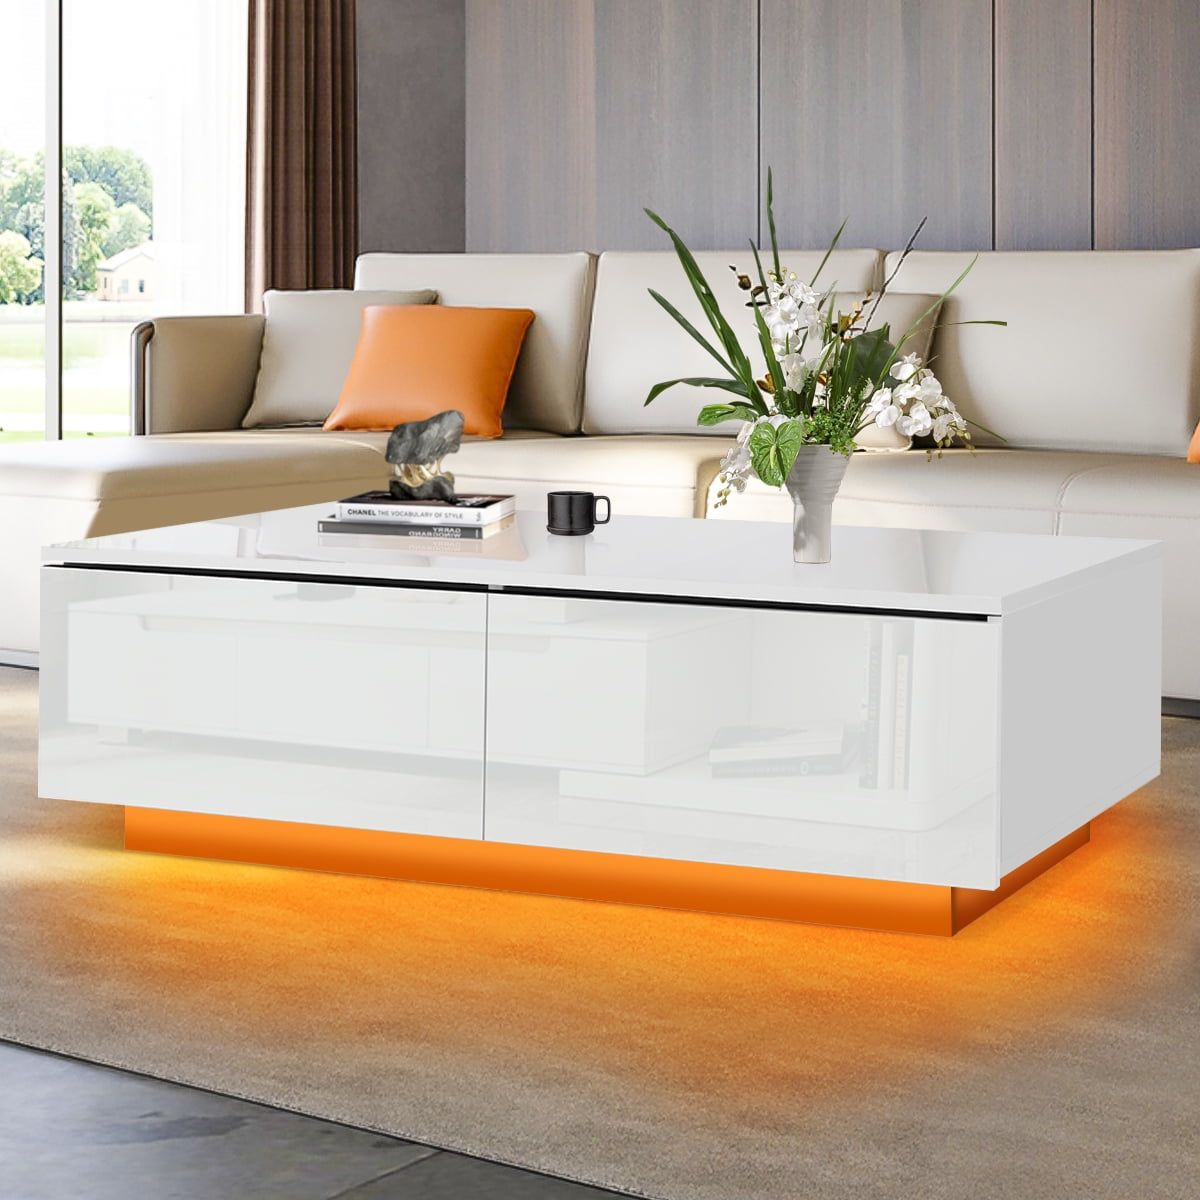 High Gloss Rectangle Coffee Table Led Cocktail Tables With 4 Storage Drawers  Modern Center Tea Table For Living Room – Walmart Throughout Led Coffee Tables With 4 Drawers (View 10 of 15)